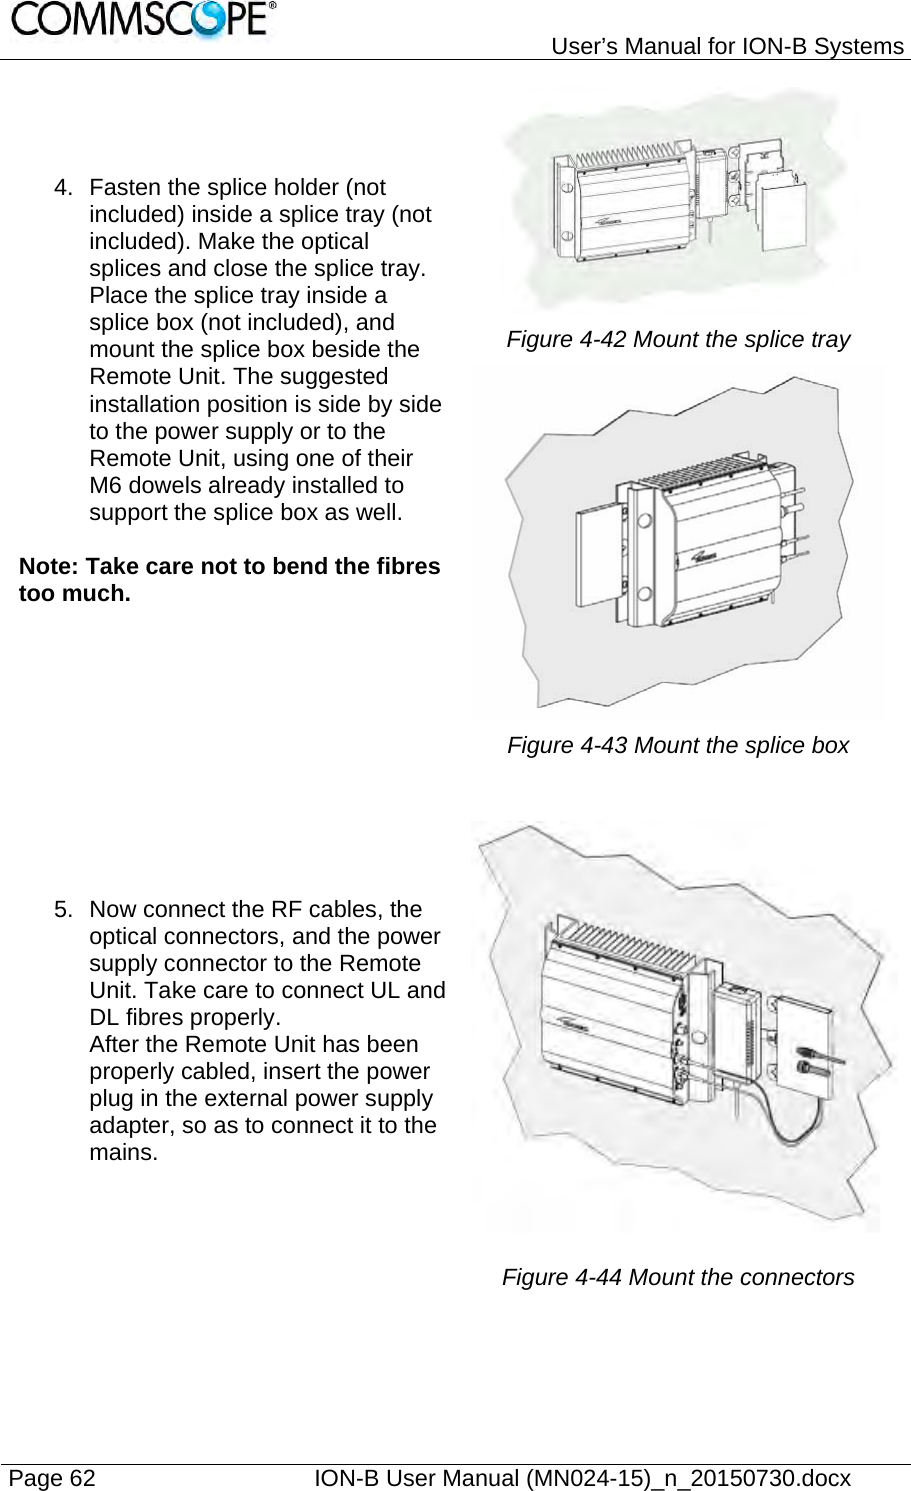   User’s Manual for ION-B Systems Page 62    ION-B User Manual (MN024-15)_n_20150730.docx  4.  Fasten the splice holder (not included) inside a splice tray (not included). Make the optical splices and close the splice tray. Place the splice tray inside a splice box (not included), and mount the splice box beside the Remote Unit. The suggested installation position is side by side to the power supply or to the Remote Unit, using one of their M6 dowels already installed to support the splice box as well.  Note: Take care not to bend the fibres too much.  Figure 4-42 Mount the splice tray  Figure 4-43 Mount the splice box  5.  Now connect the RF cables, the optical connectors, and the power supply connector to the Remote Unit. Take care to connect UL and DL fibres properly. After the Remote Unit has been properly cabled, insert the power plug in the external power supply adapter, so as to connect it to the mains.  Figure 4-44 Mount the connectors  